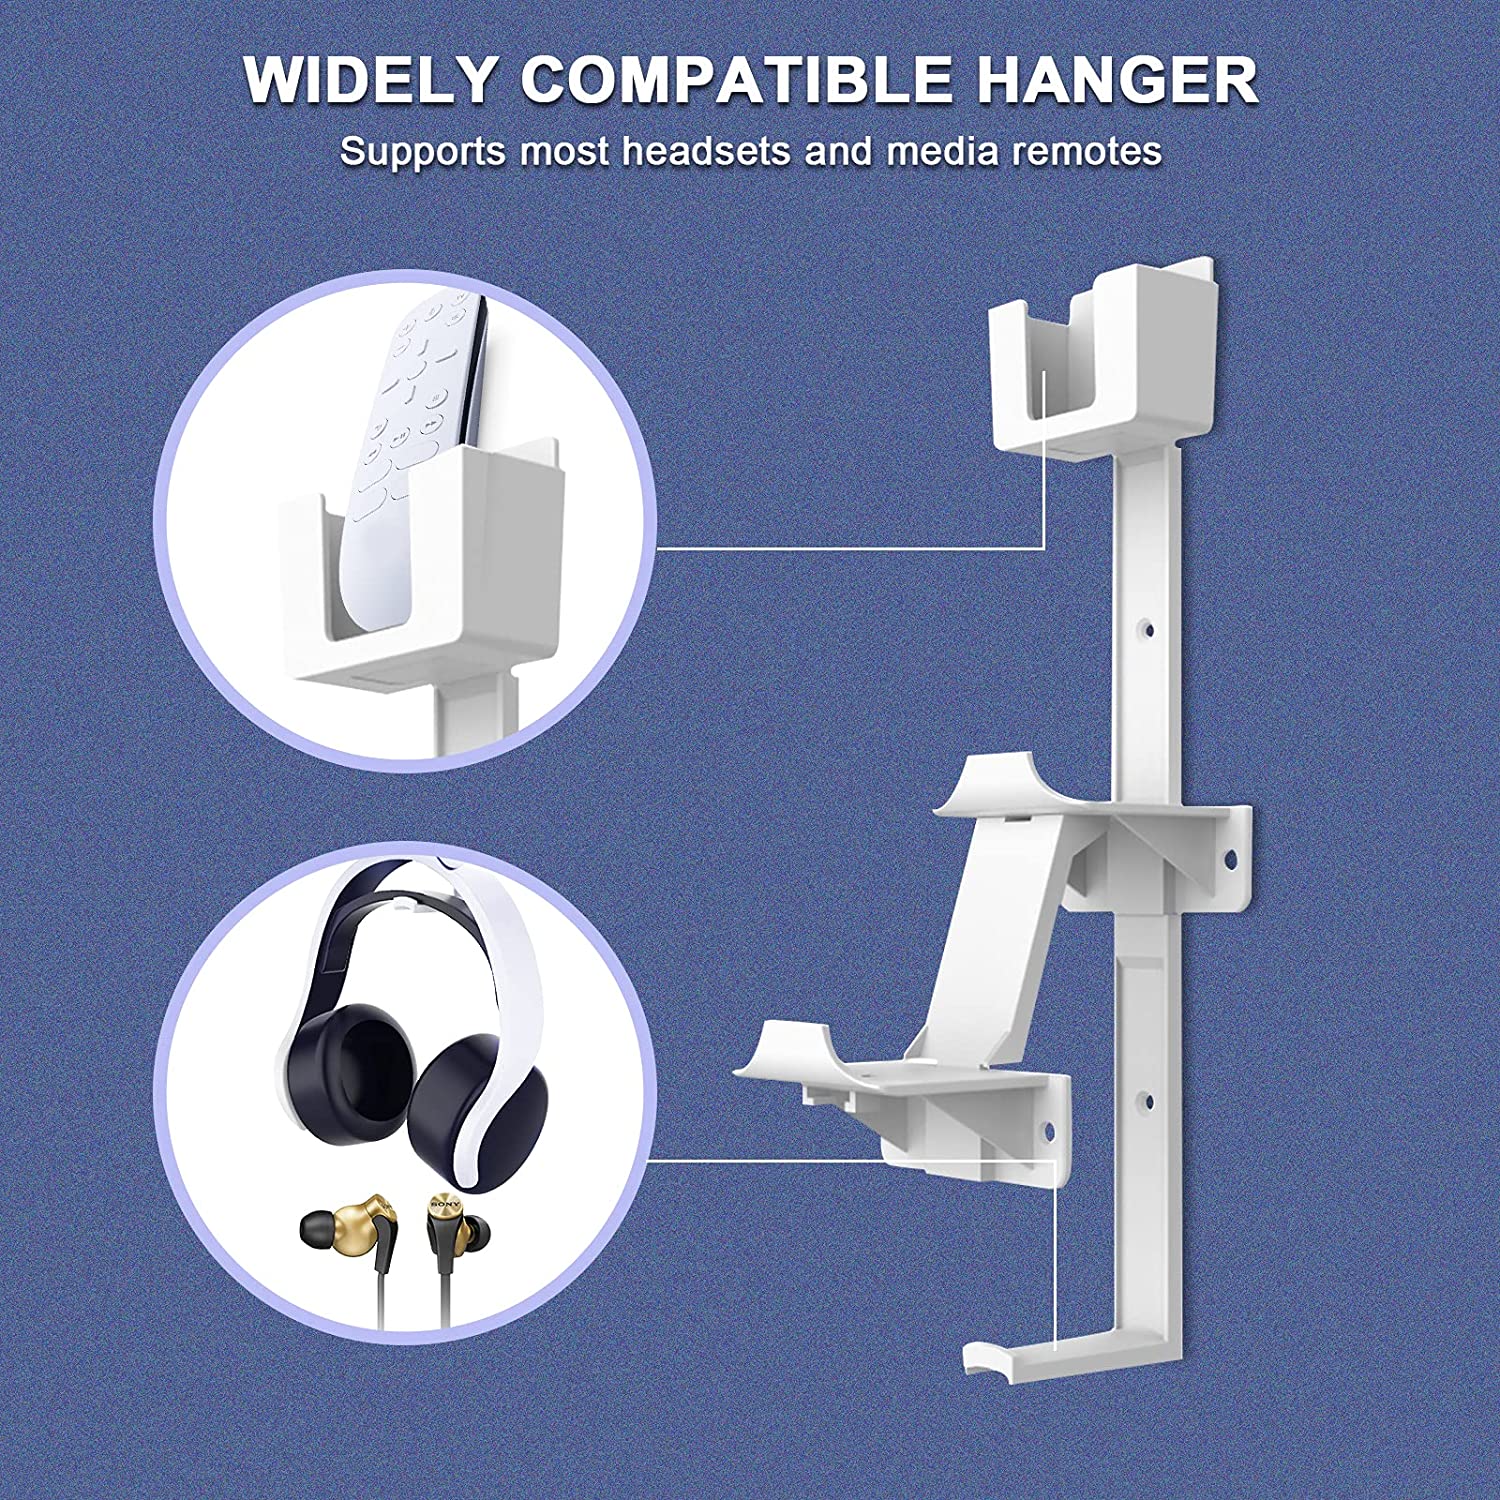 Highly versatile multi-controller hanger supports remote and headphone placement too.